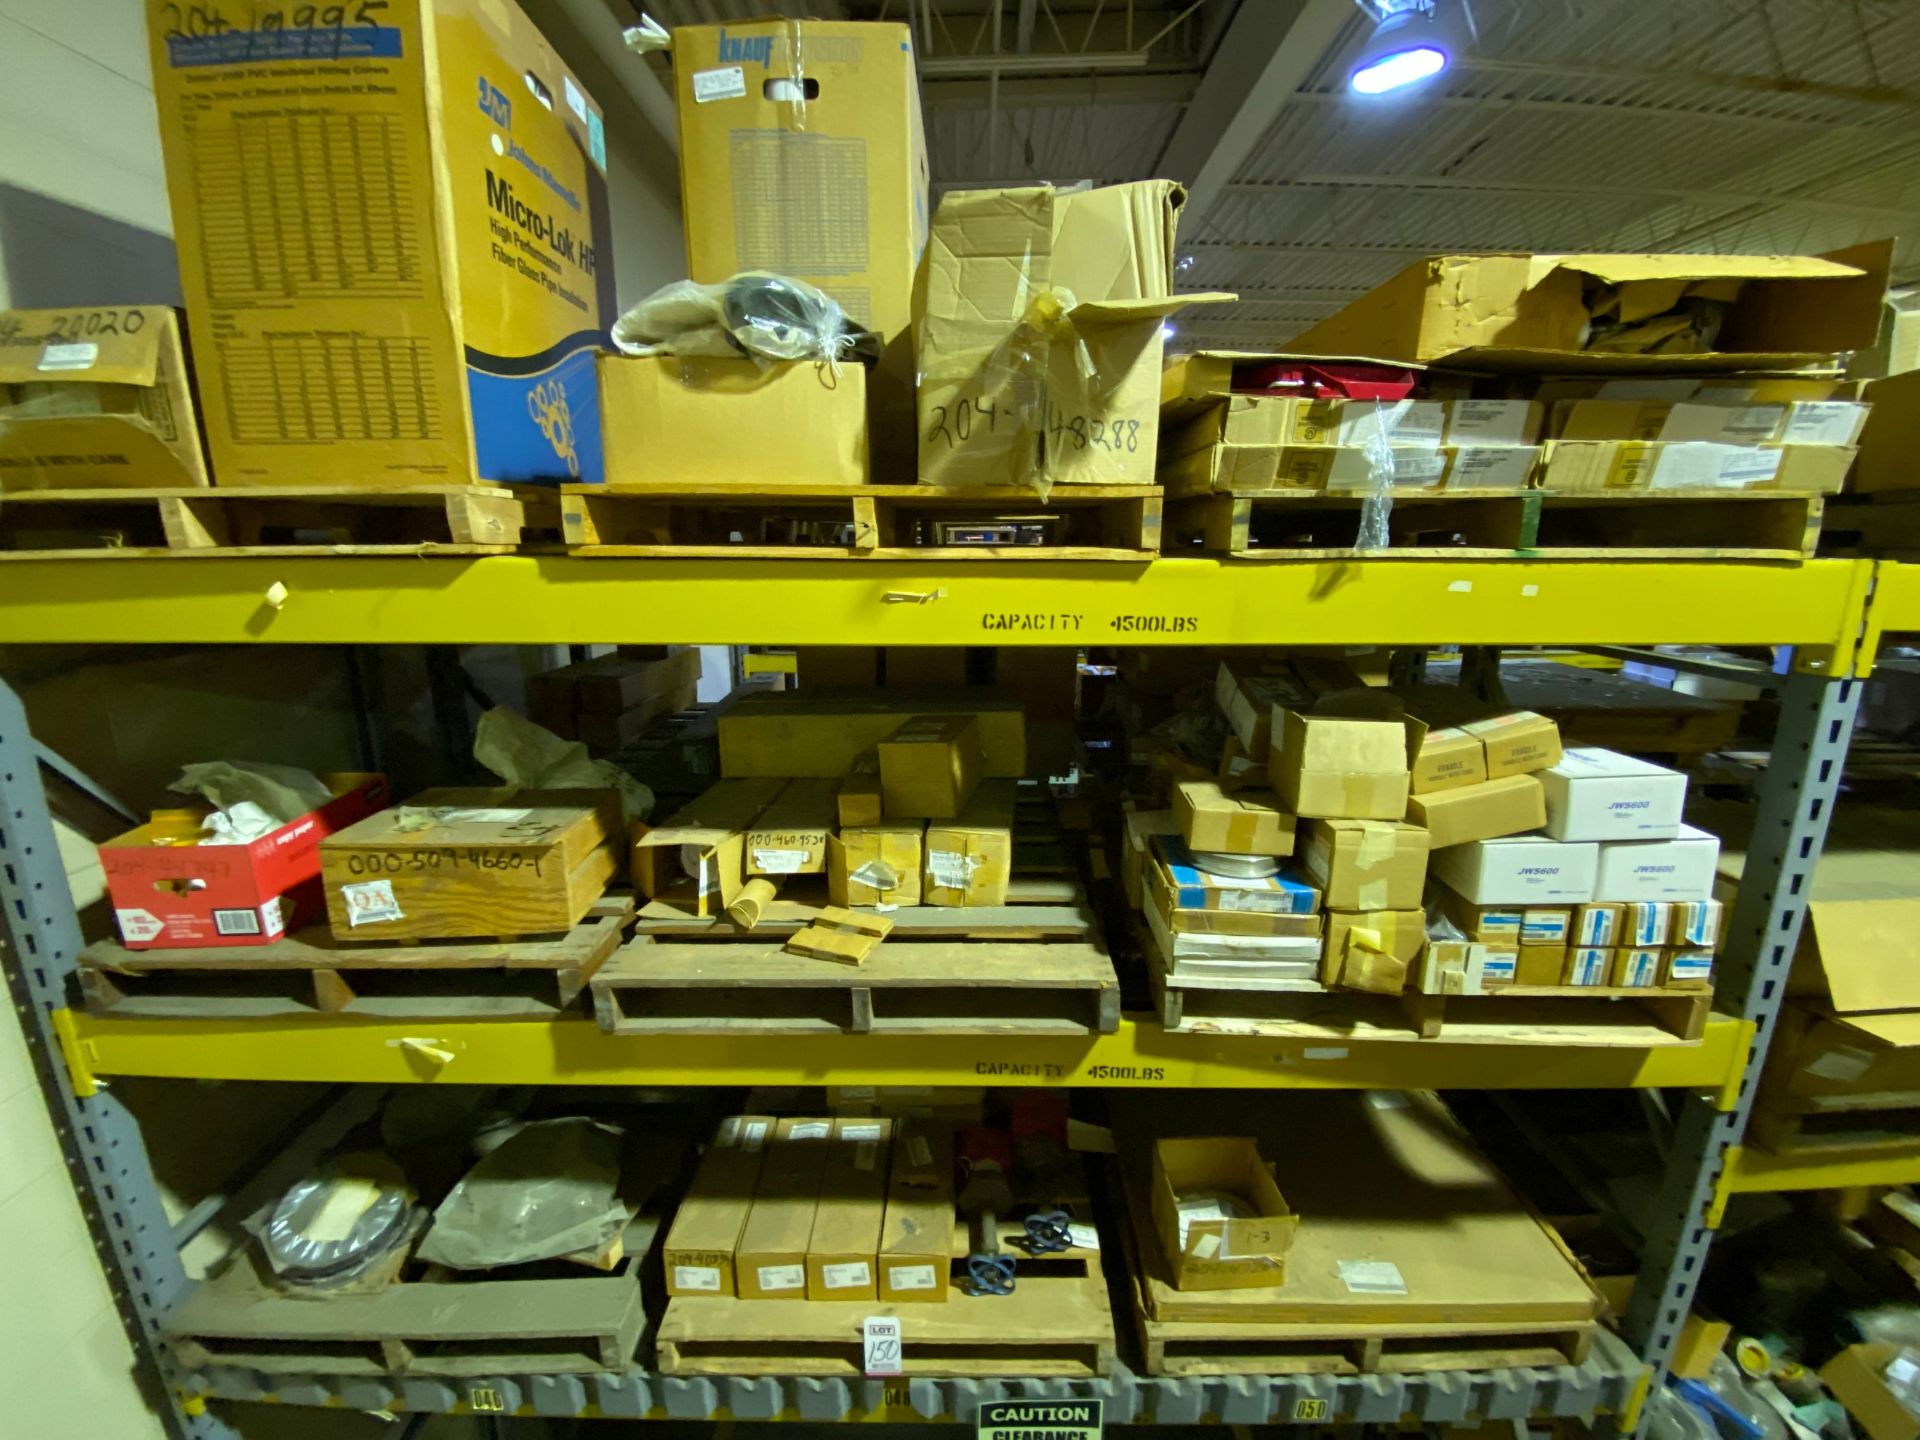 (9) PALLETS OF MAINTENANCE & REPAIR PARTS ON THE FLOOR AND (3) PALLET RACK SHELVES (NO SHELVING)